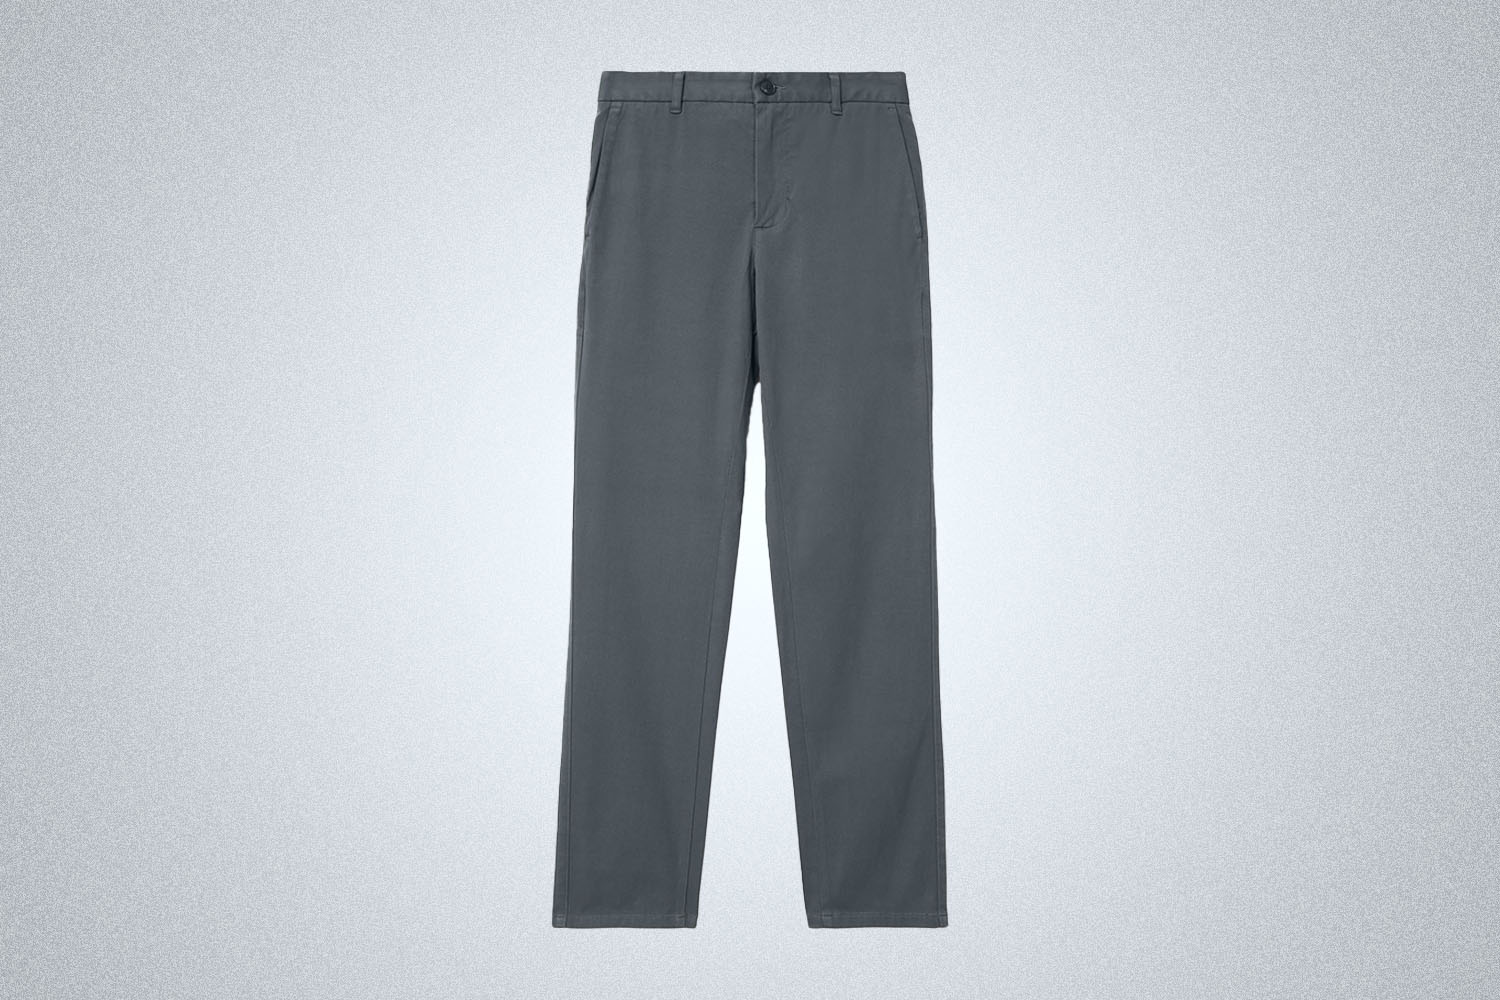 Everlane Chinos on a grey background